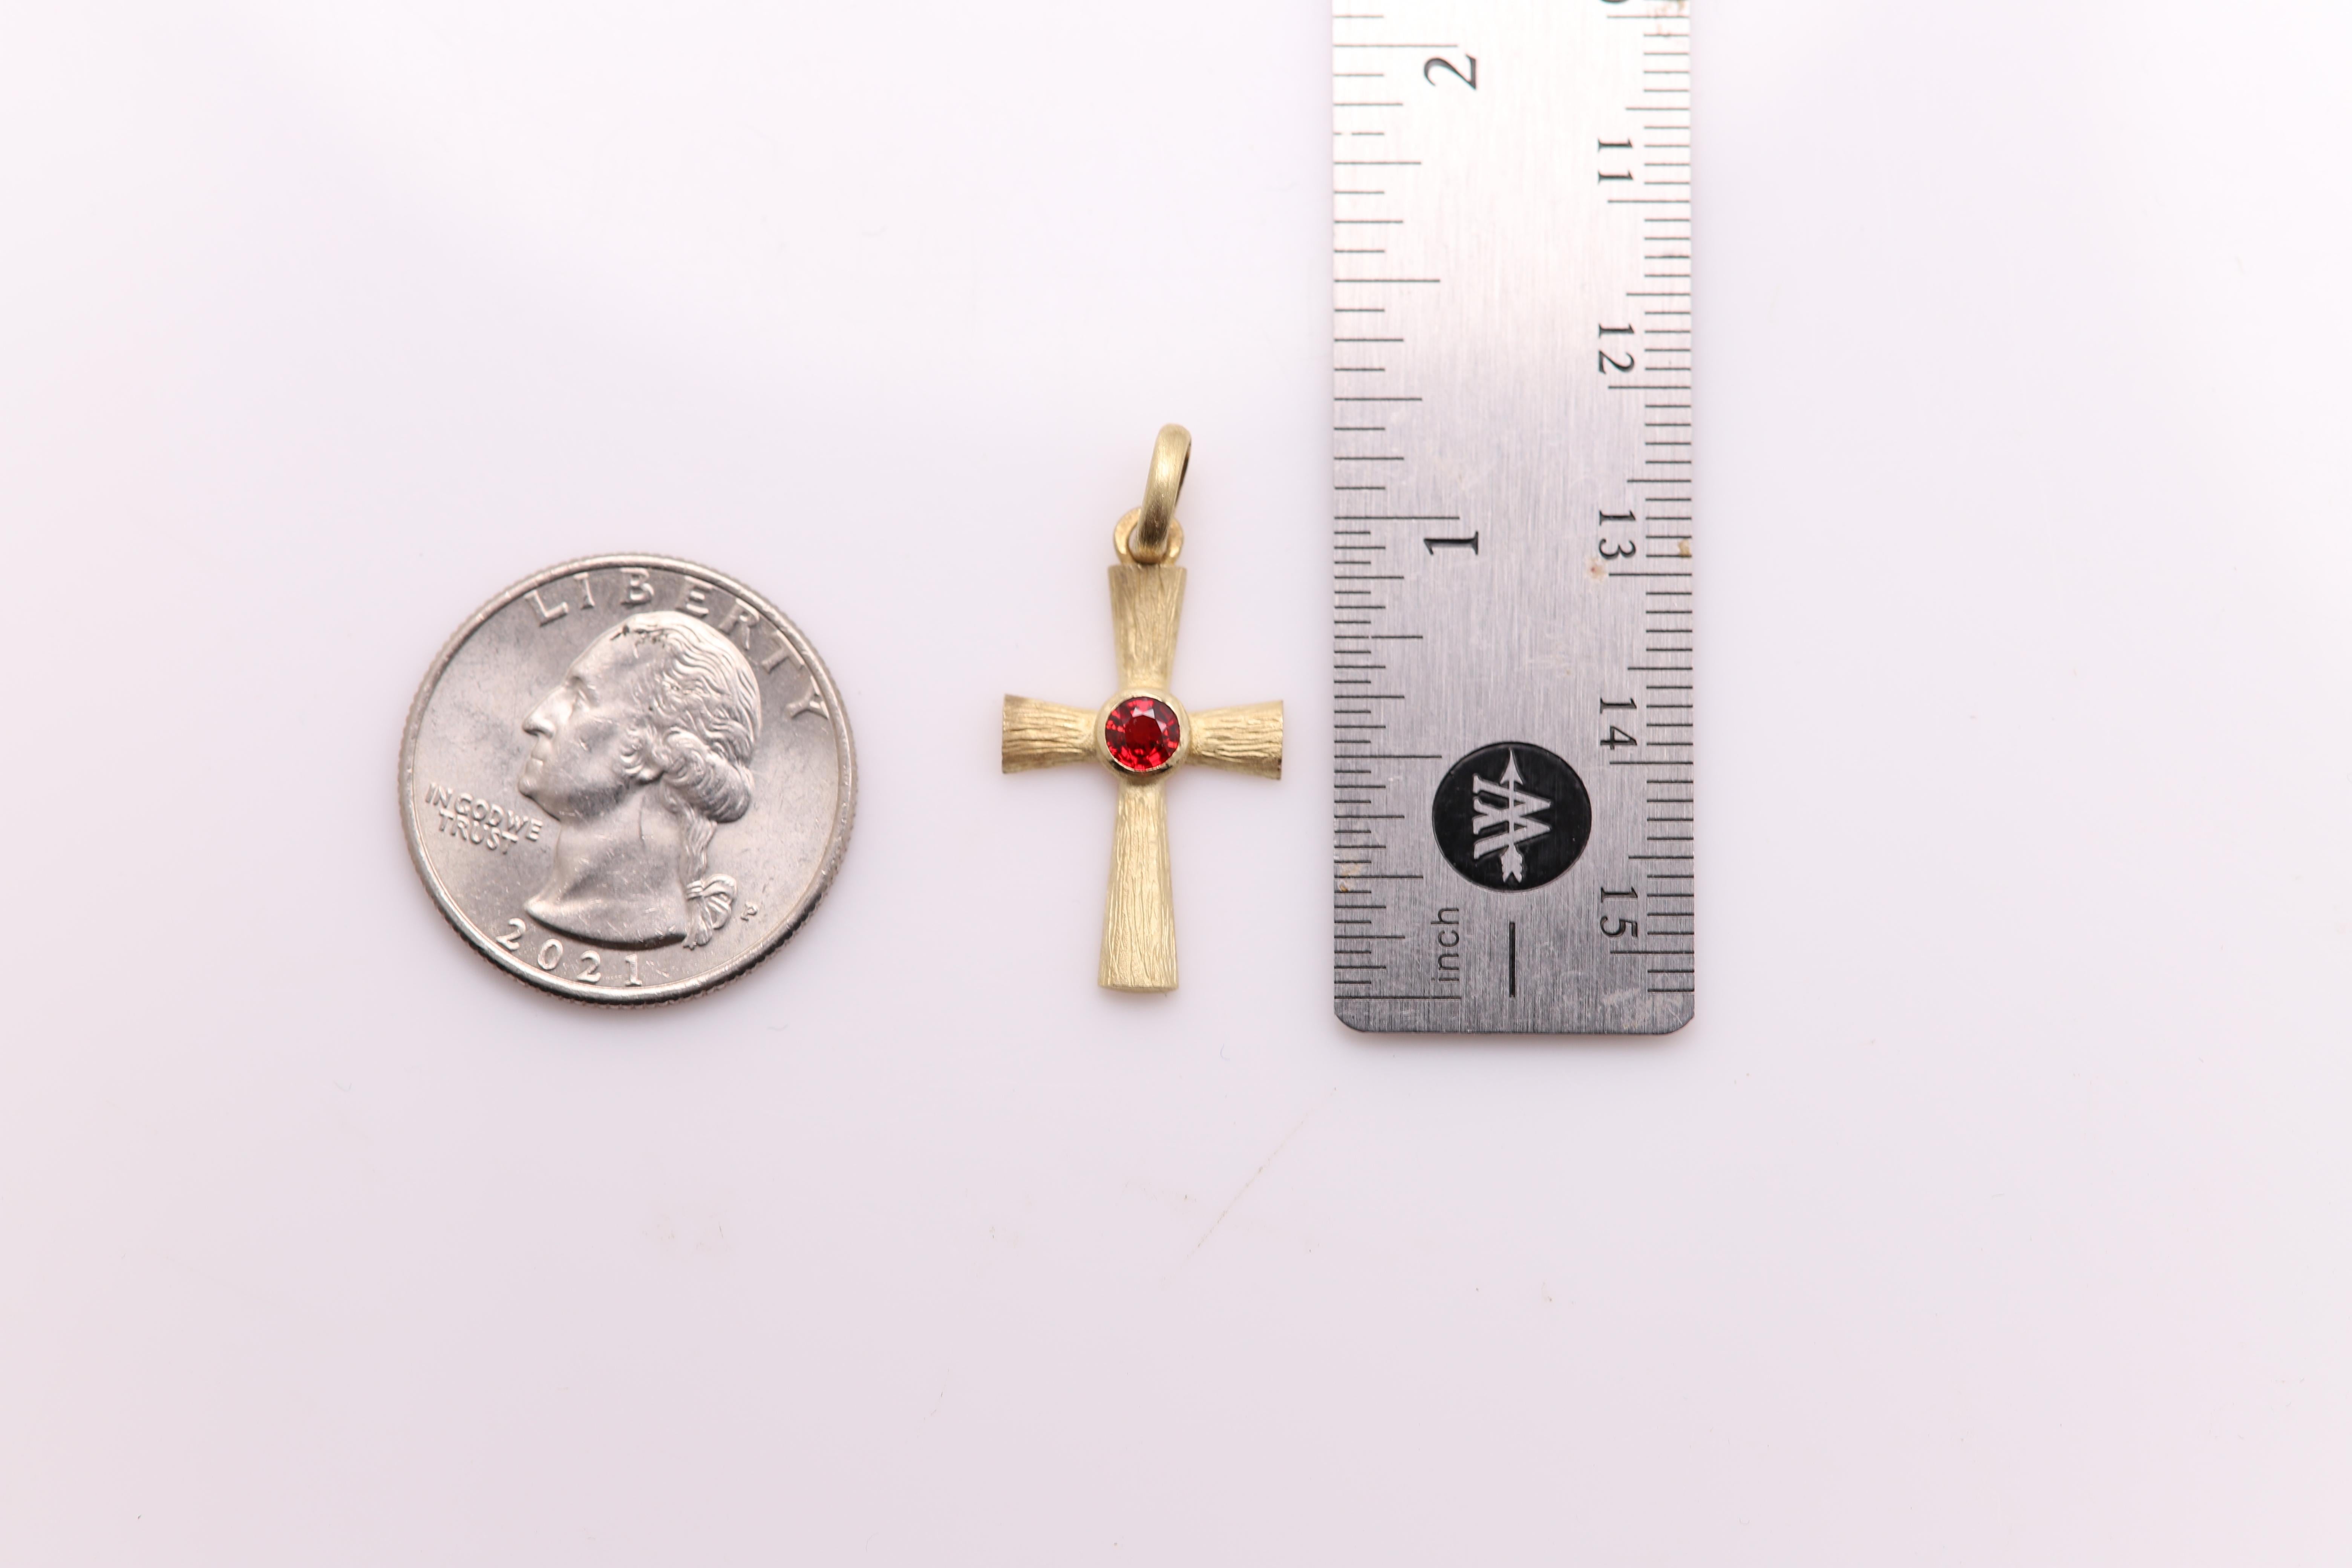 Brilliant Cross Pendant
Somewhat vintage about 20 years old - new, never used
Set in 14k yellow gold 1.70 gram - brushed finish (solid gold)
Approx size 25 mm high ( 1' inch)
Natural Red Sapphire 4.0mm(approx 0.35 carat)
Hand Made in Italy  
Gift